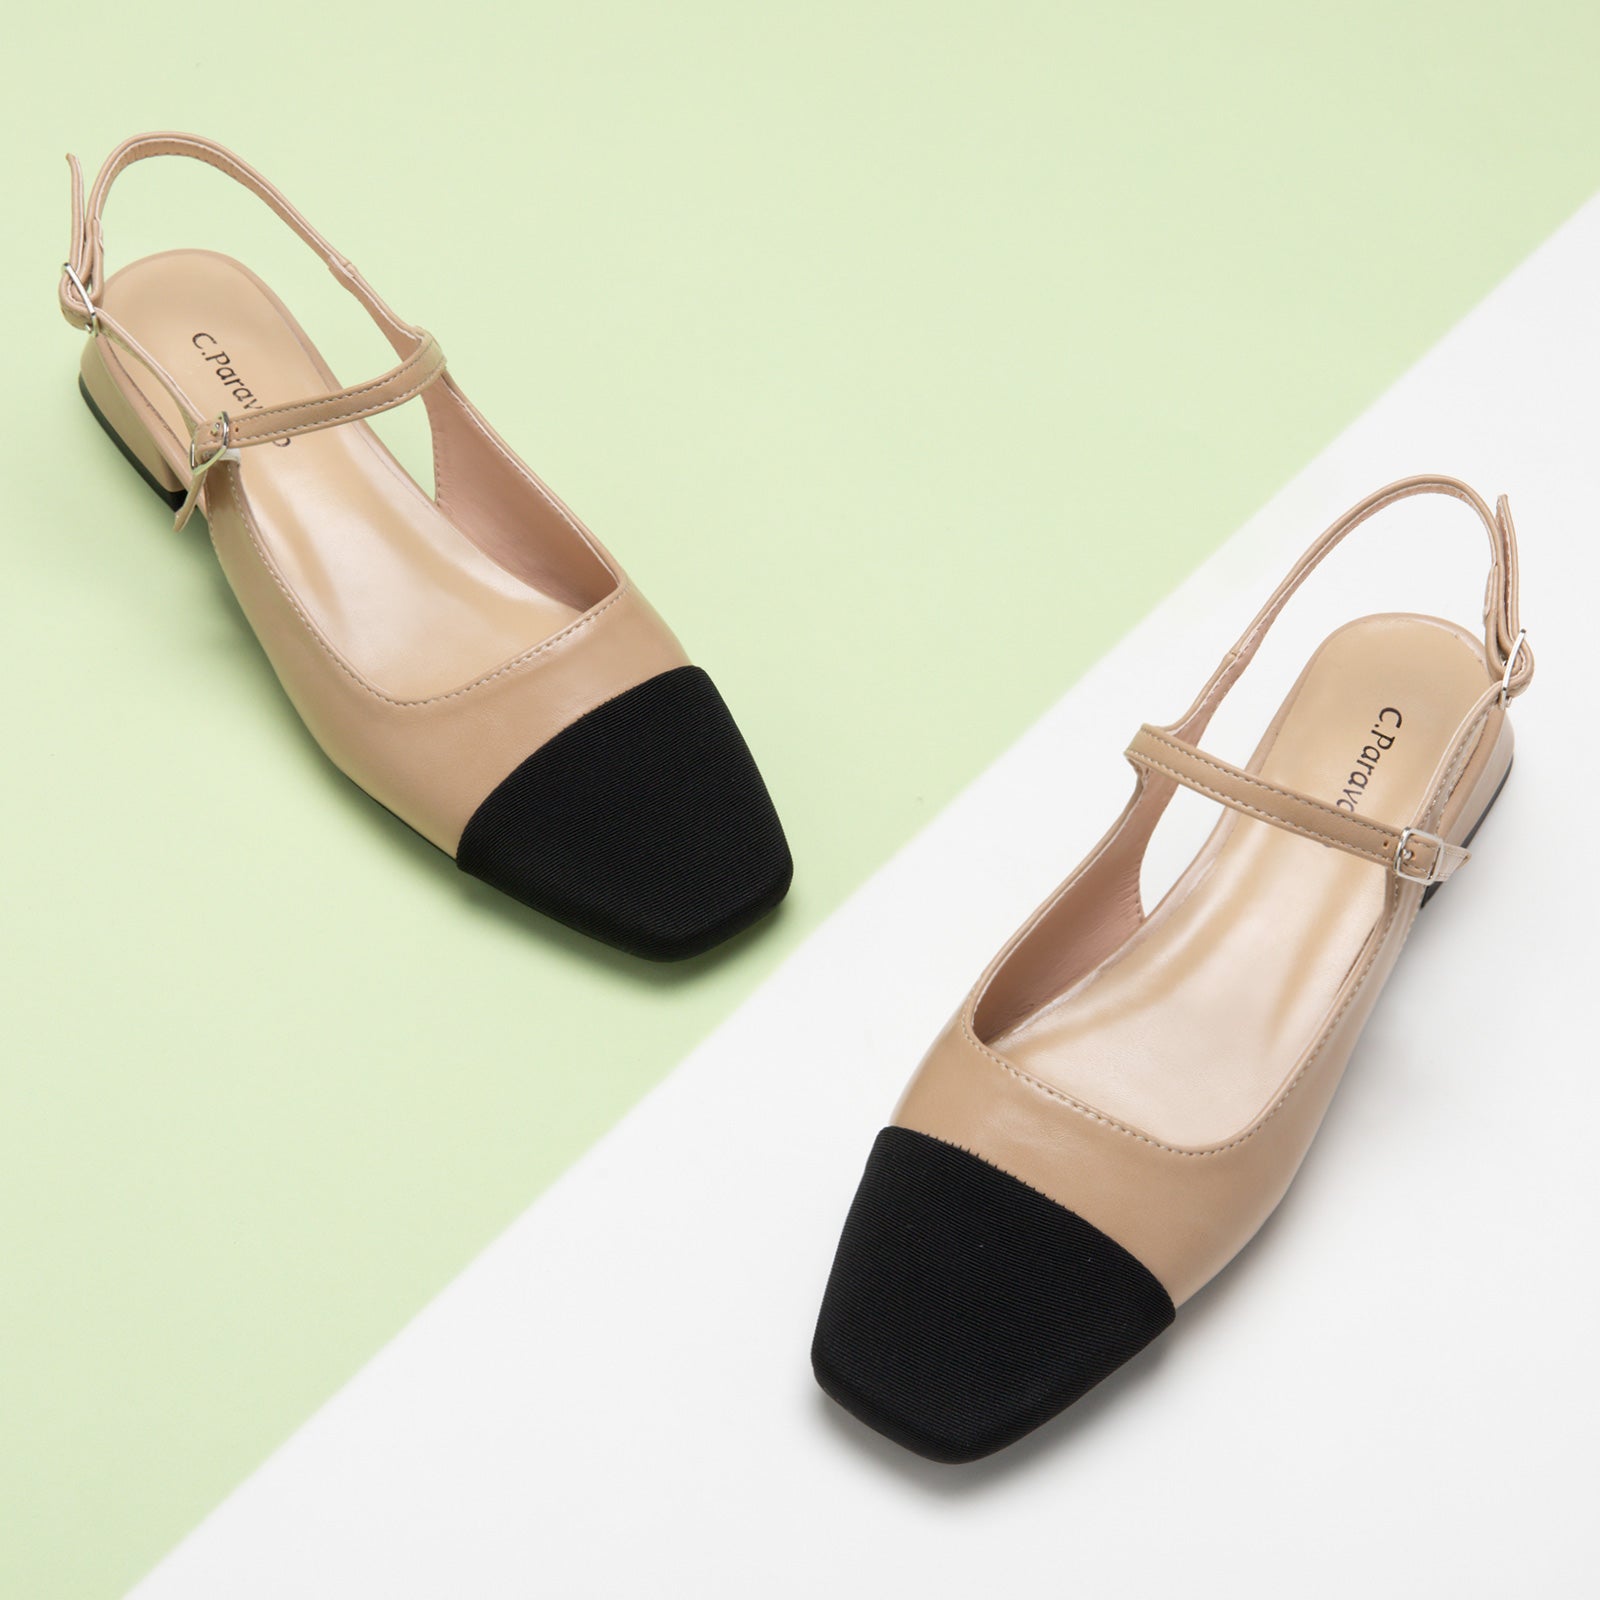  Beige Squared Toe Slingback Flats, perfect for a confident and fashionable look in any urban setting